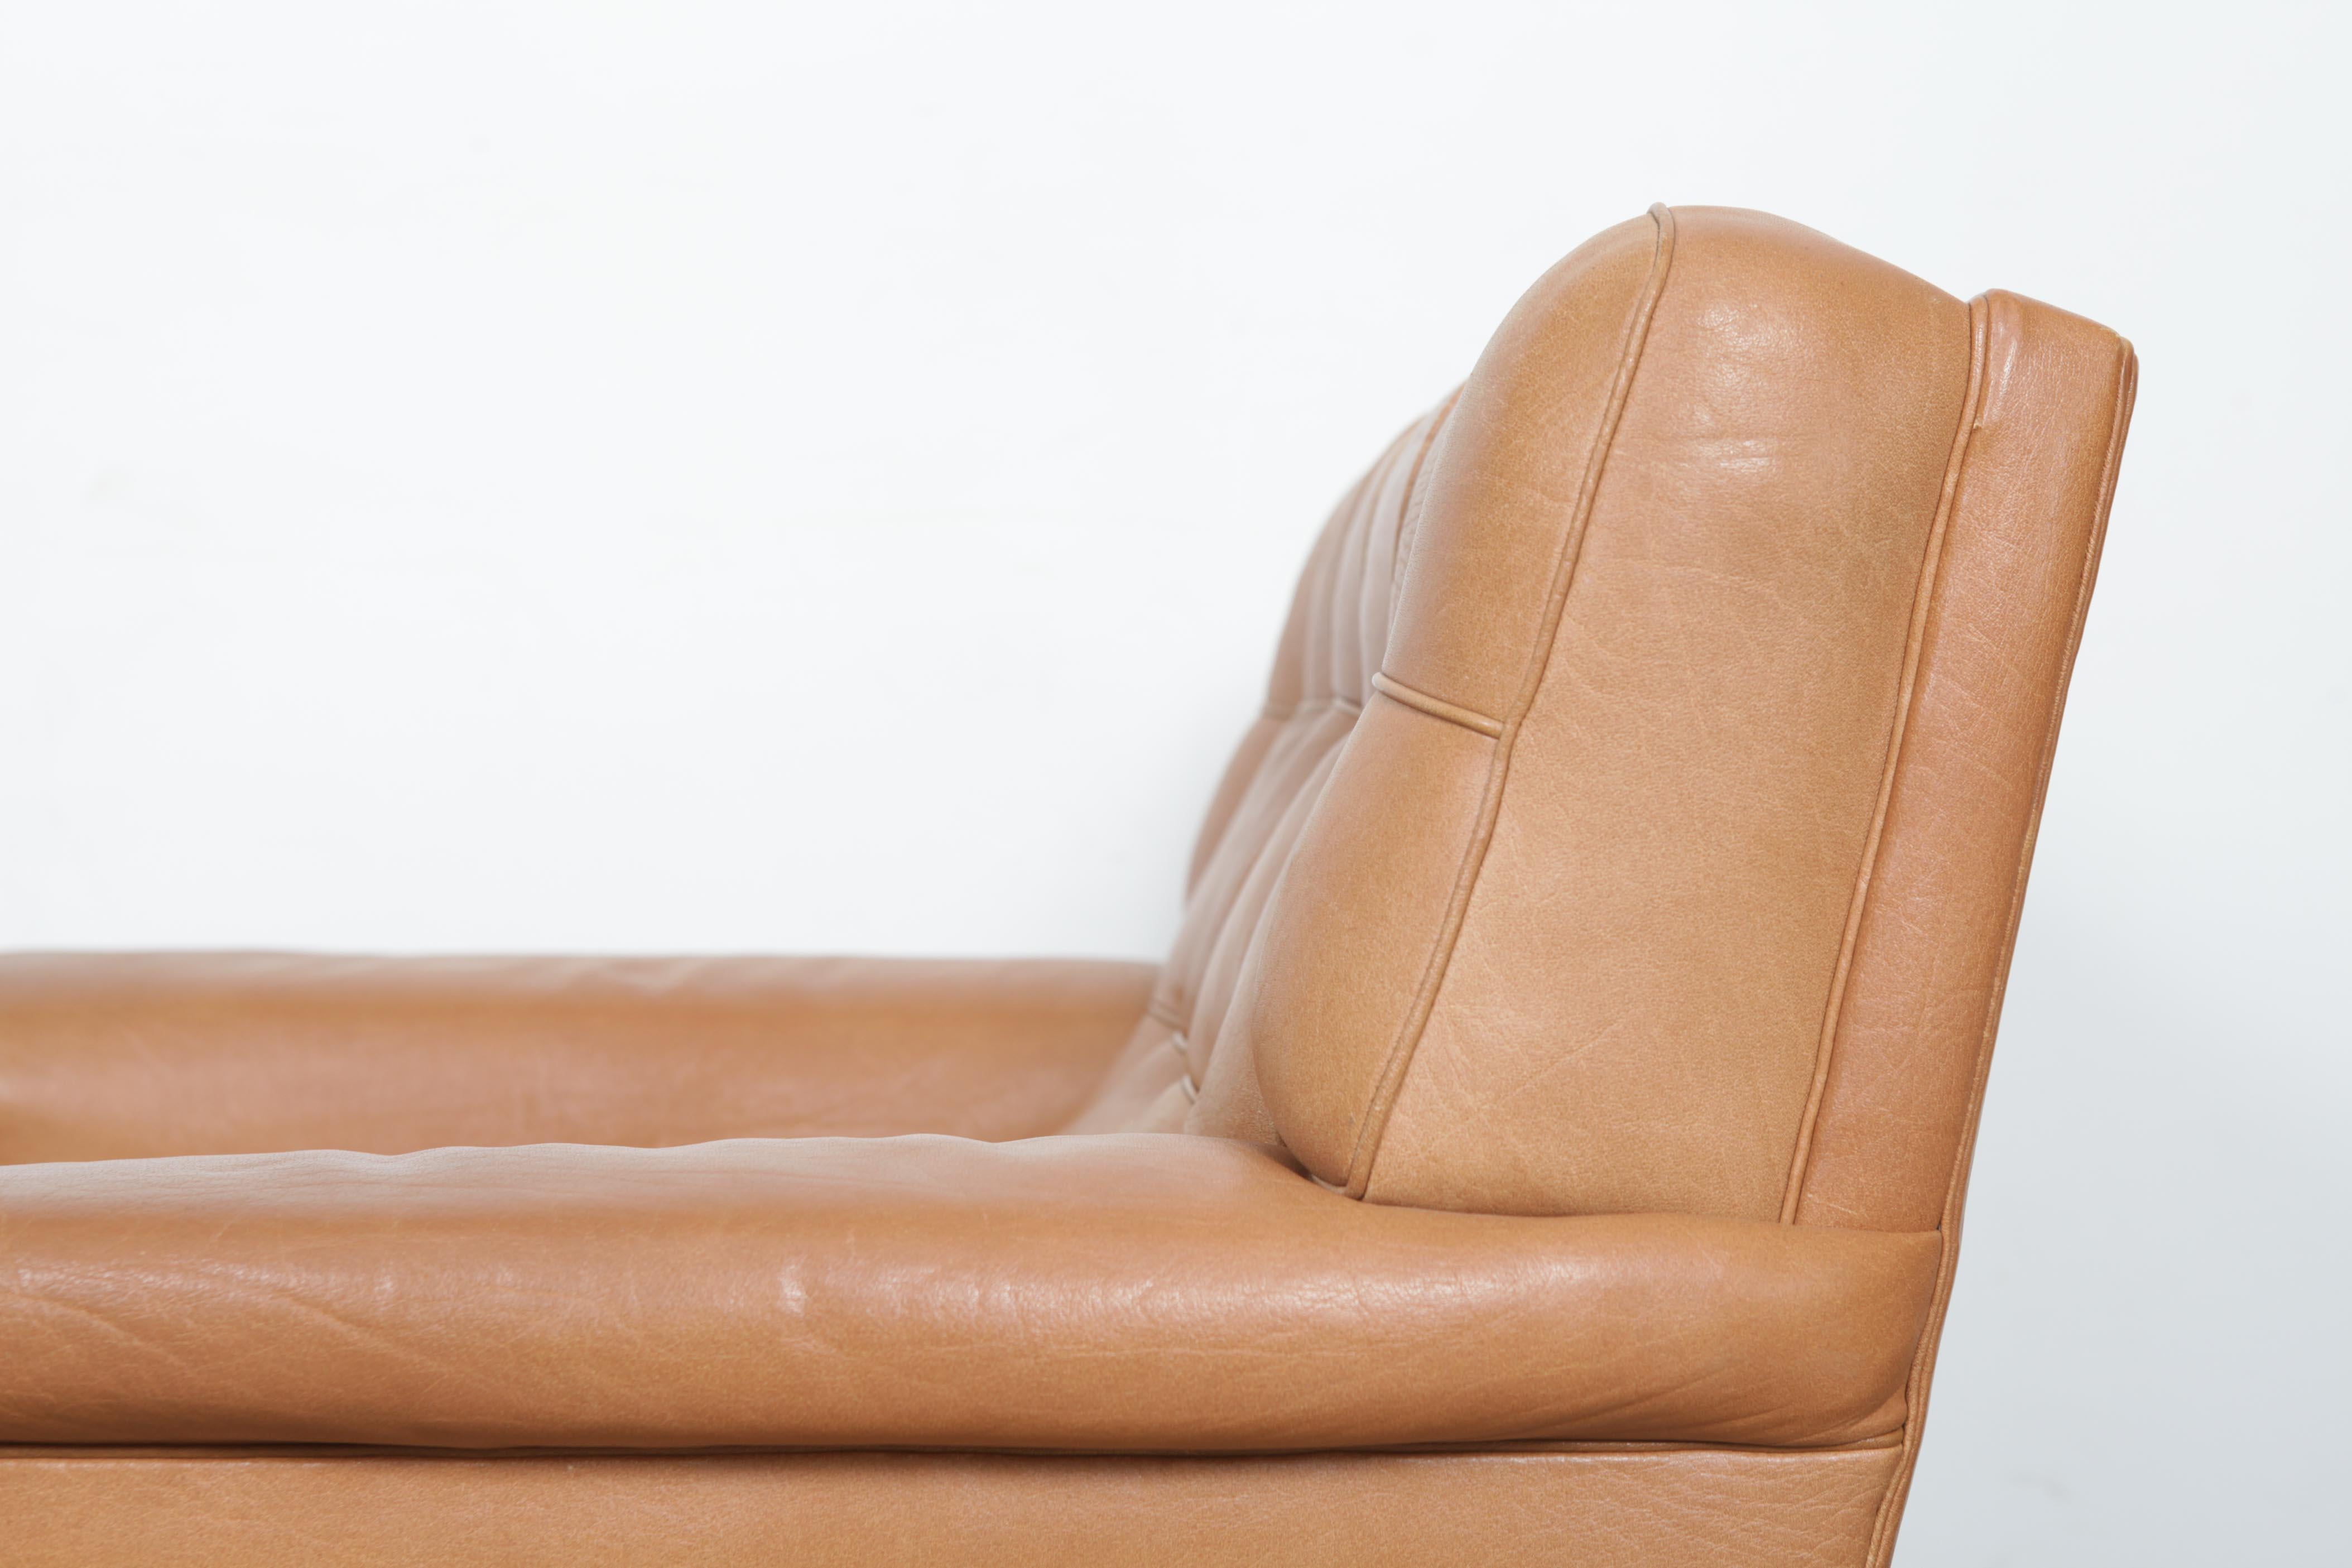 Arne Norell Merkur Tan Leather Tufted Lounge Chair, Sweden, Norell AB 1